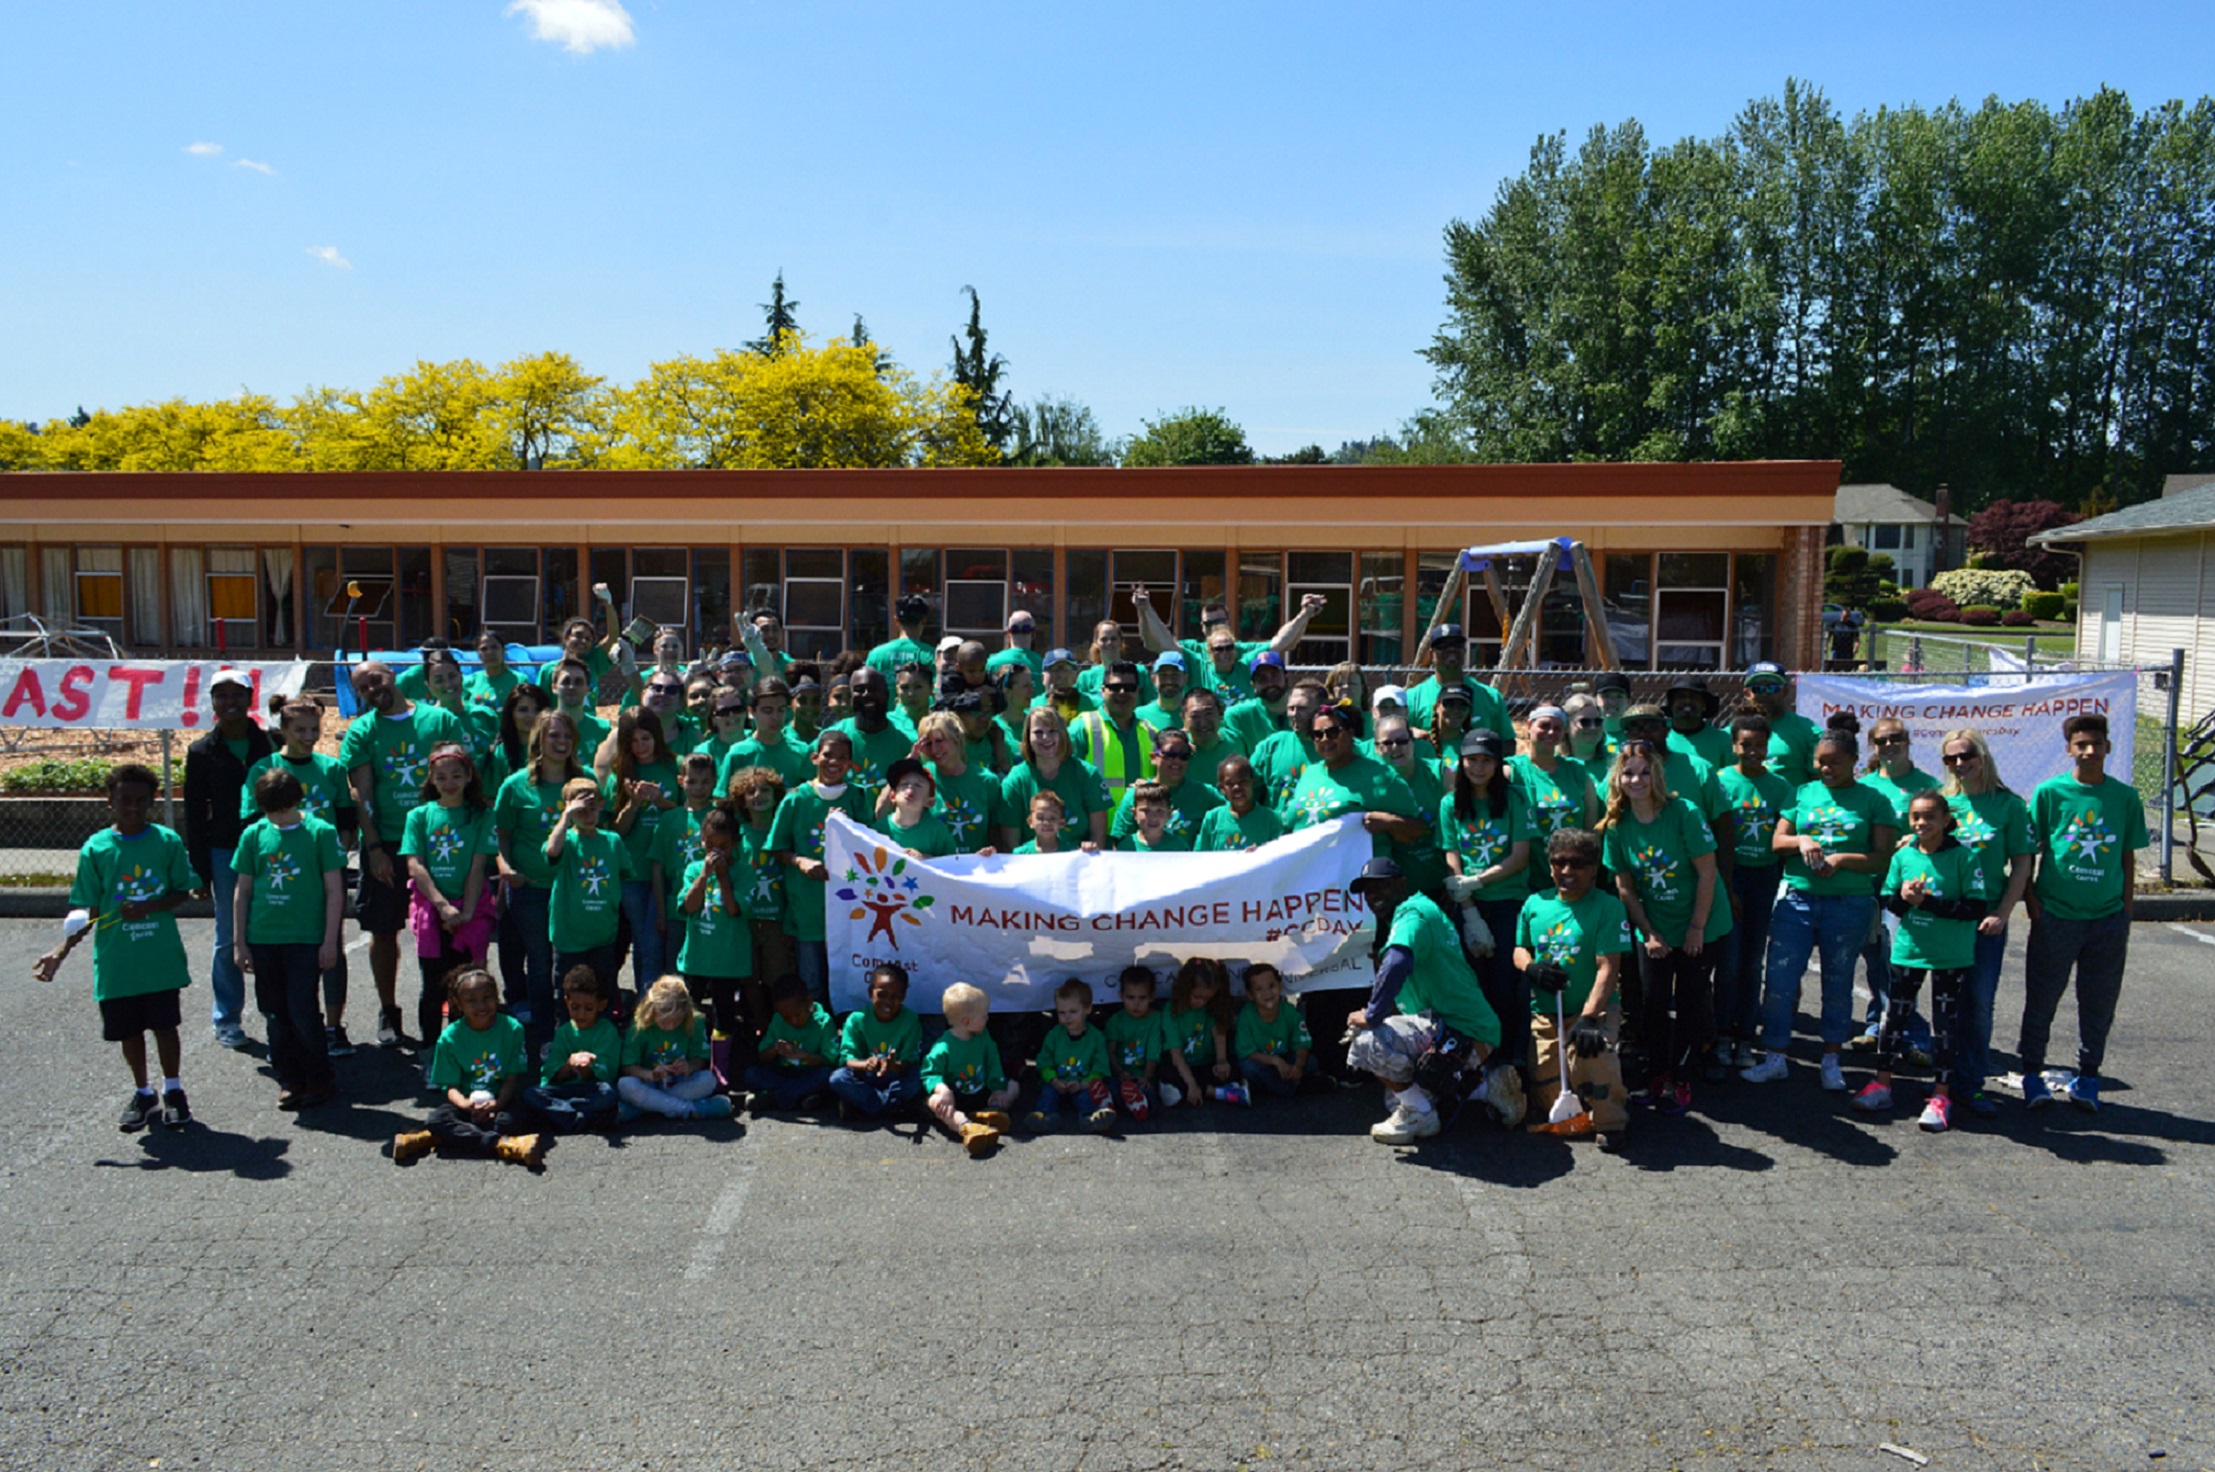 Comcast Cares Day Benefits Puyallup Playcare Center with FullScale